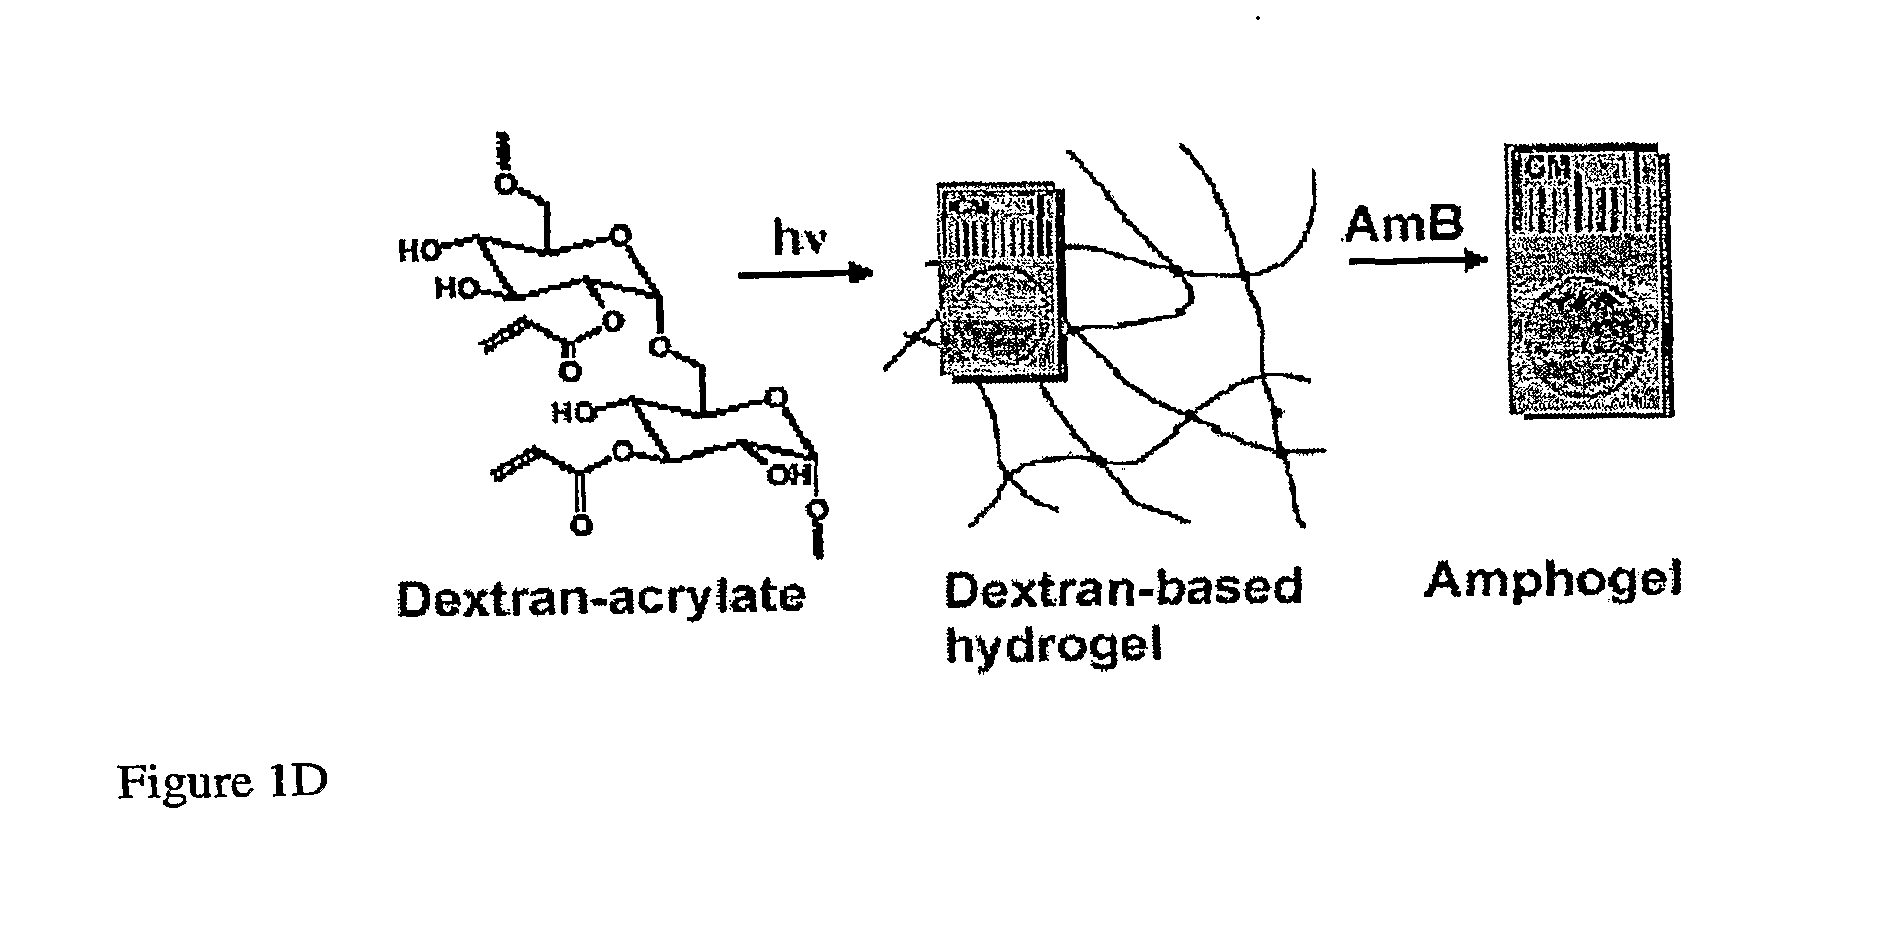 Coating of devices with effector compounds